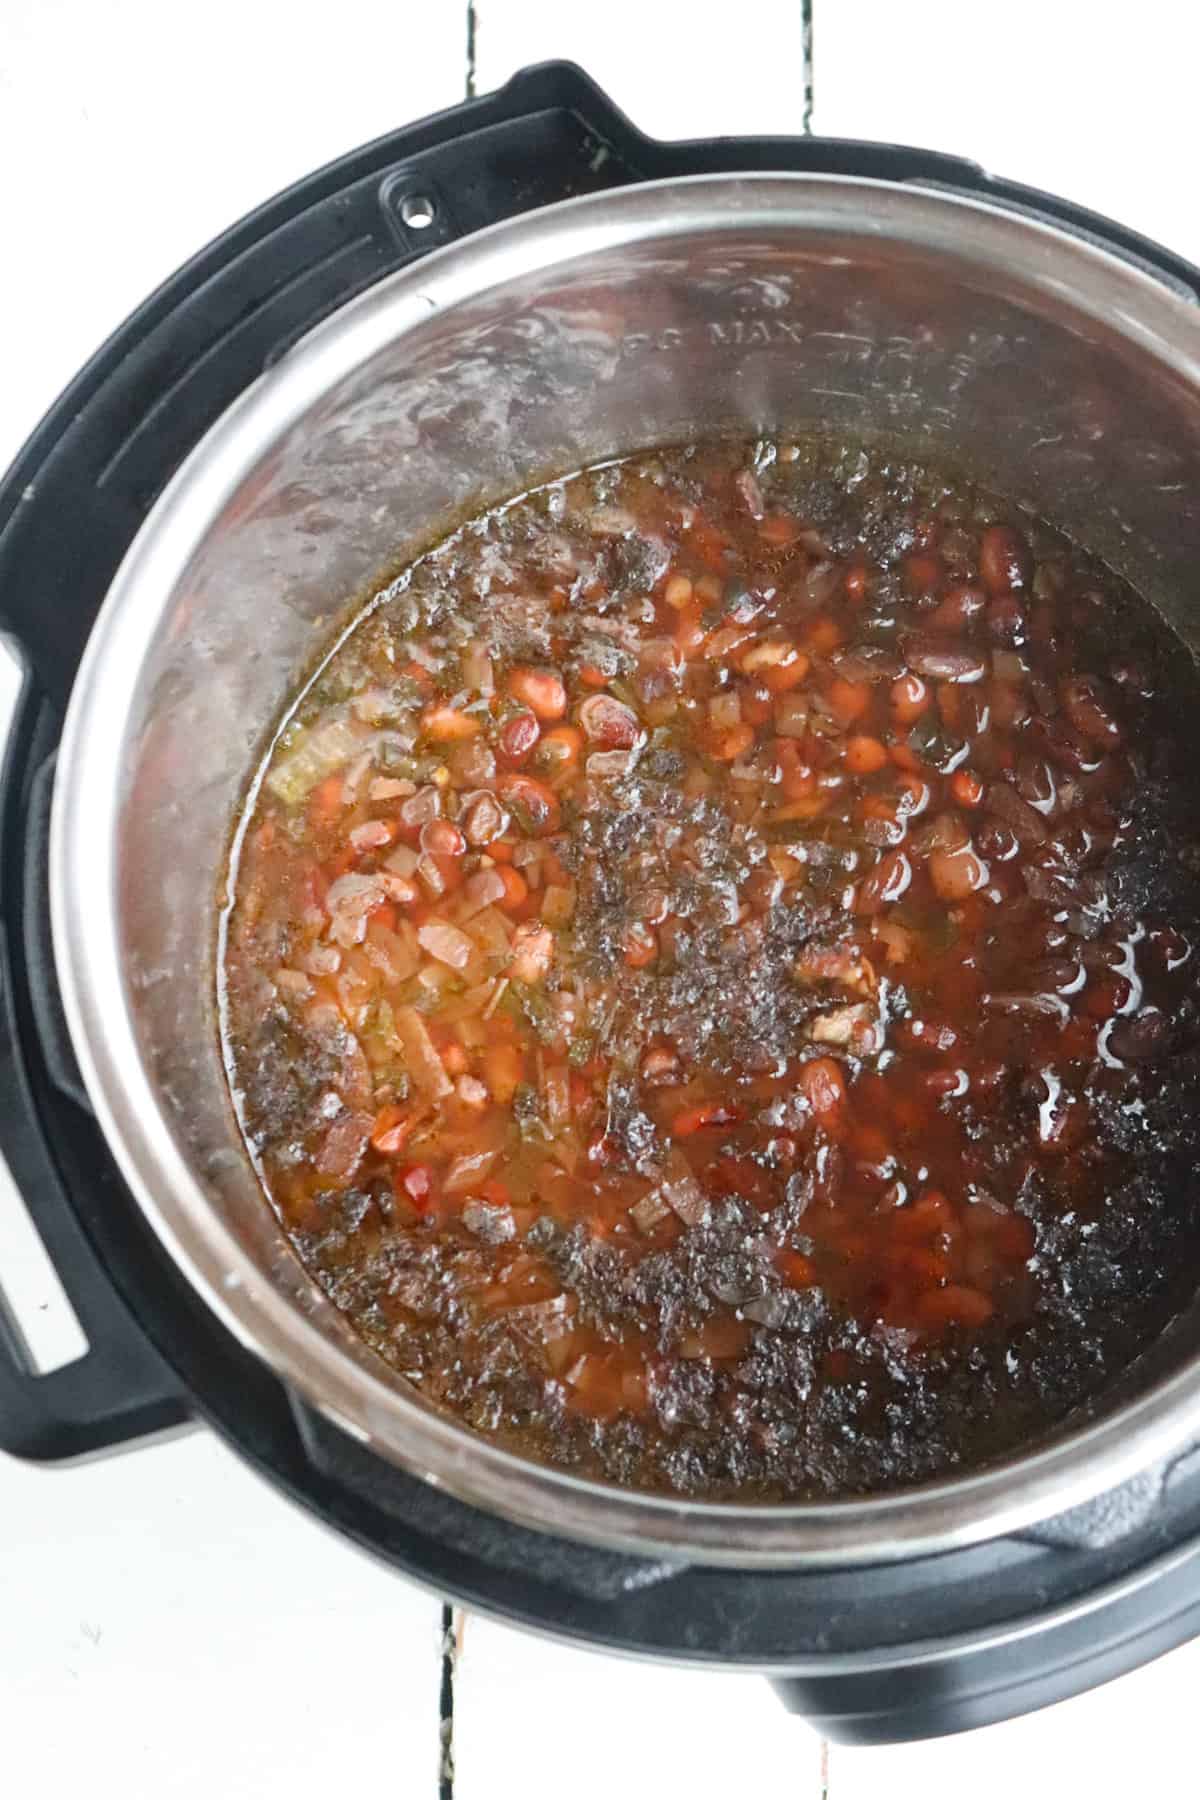 cooked pinto beans in pressure cooker before being drained.